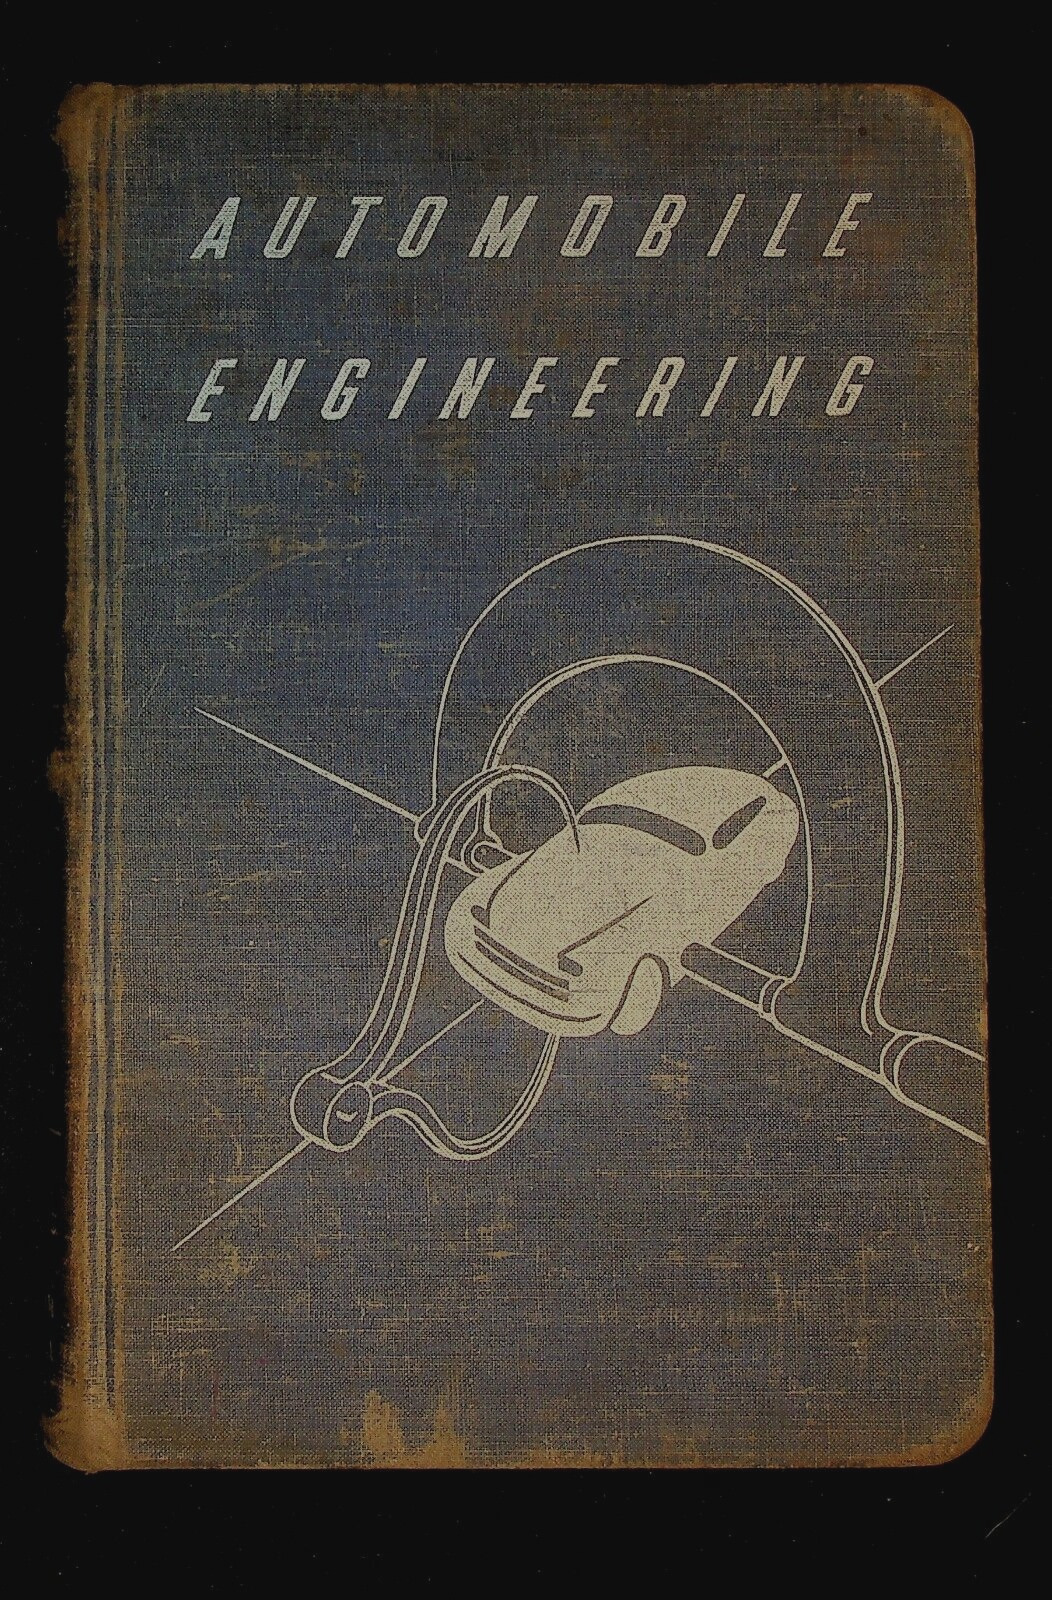 1947 Automobile Engineering Ray F Kuns American Technical Society Chicago IL S6B